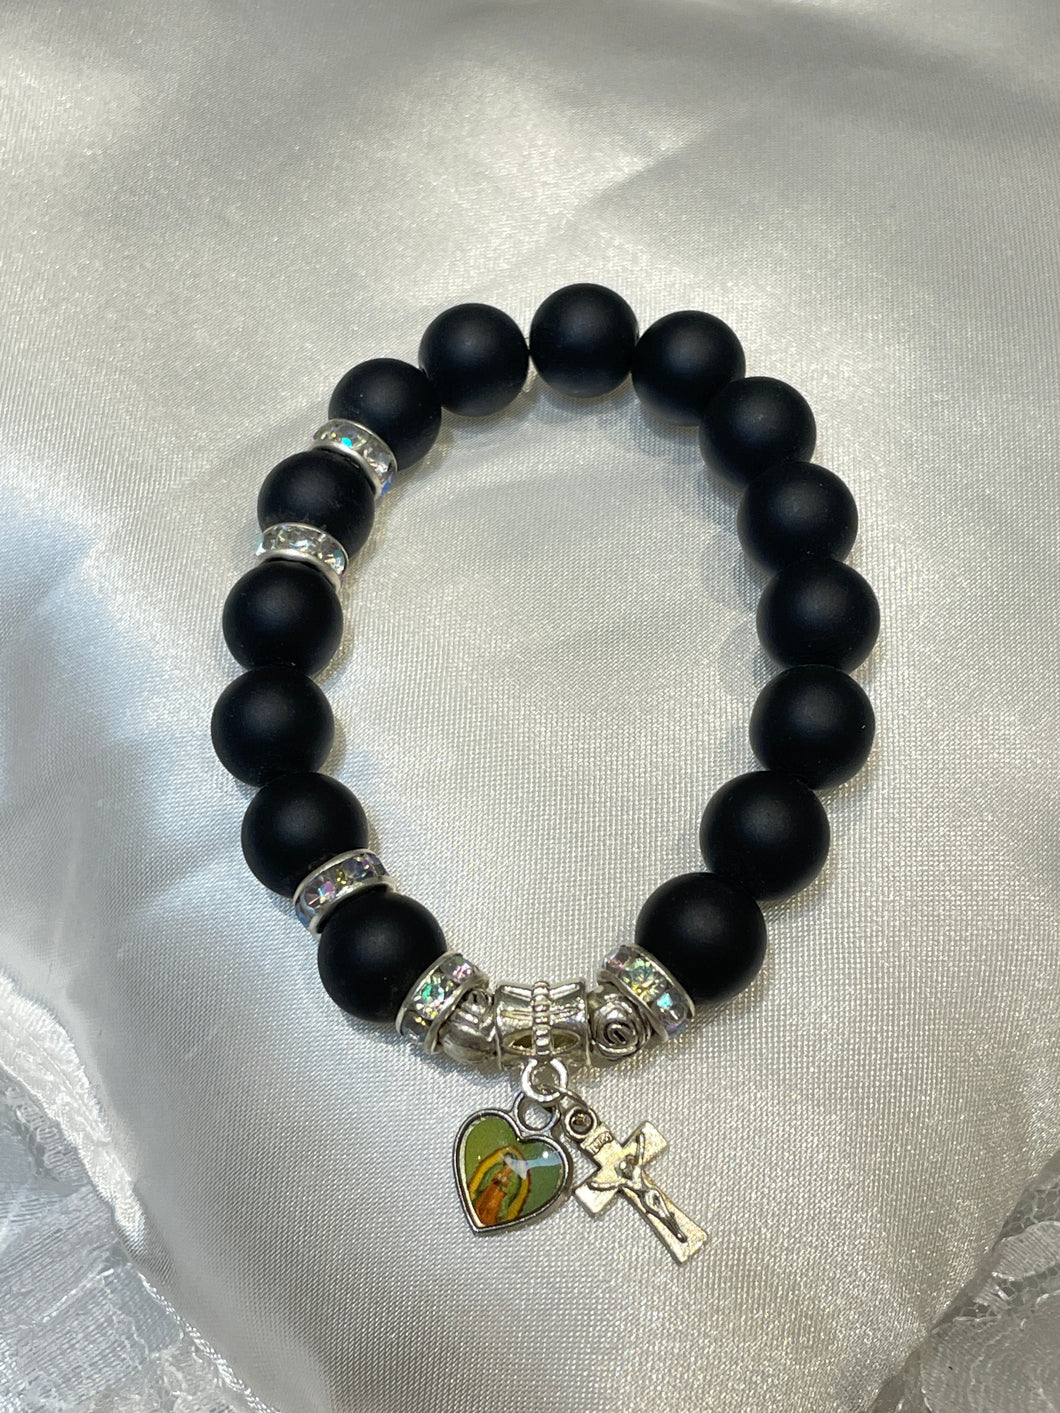 Matte Black Gemstone Rosary Bracelet with Our Lady of Guadalupe and Crucifix Charms